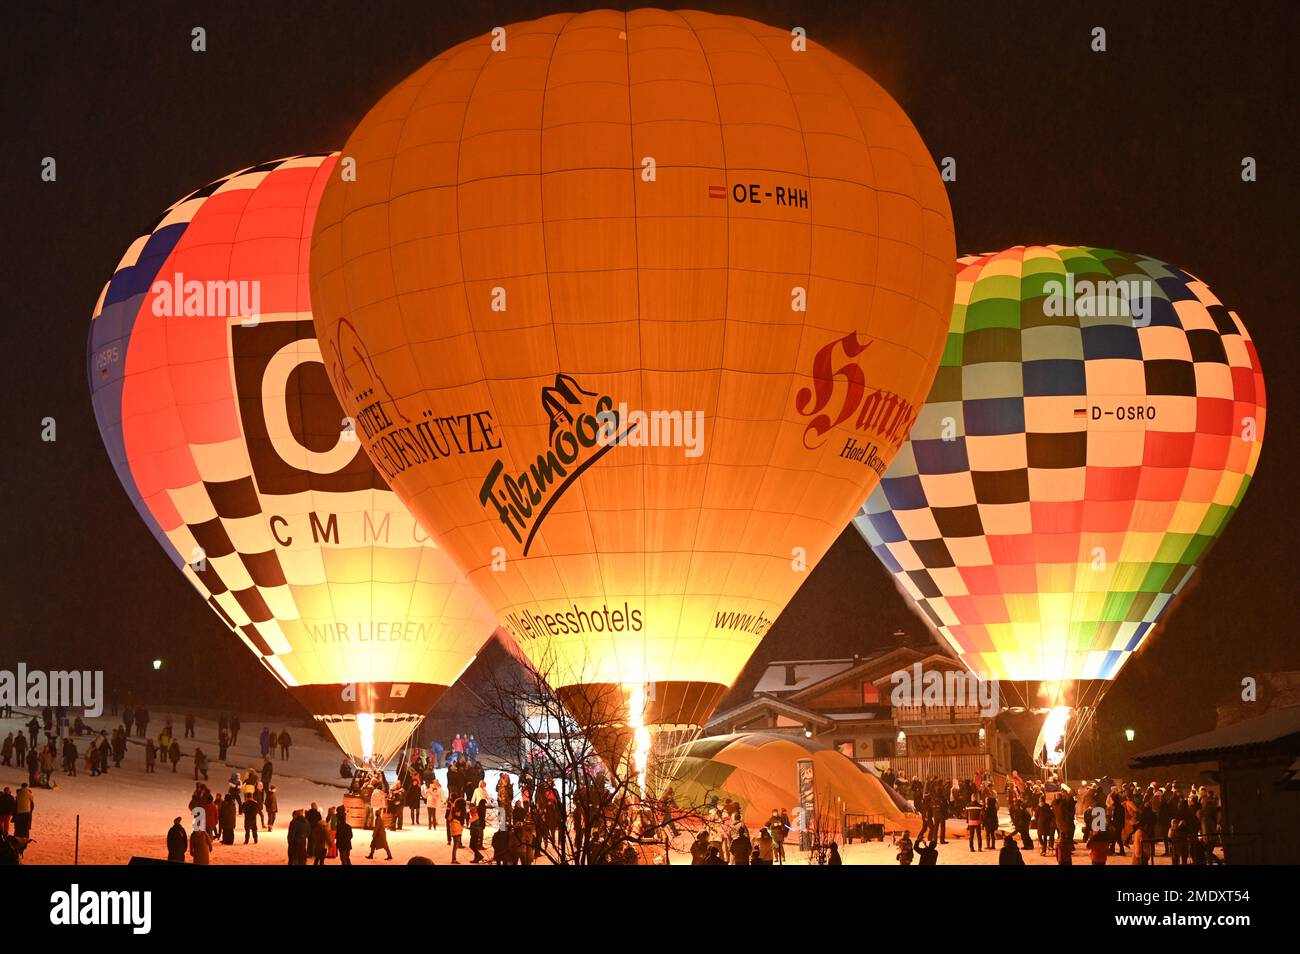 At the night of the balloons, the balloonists fire their balloons on the ground and create a colorful spectacle Stock Photo